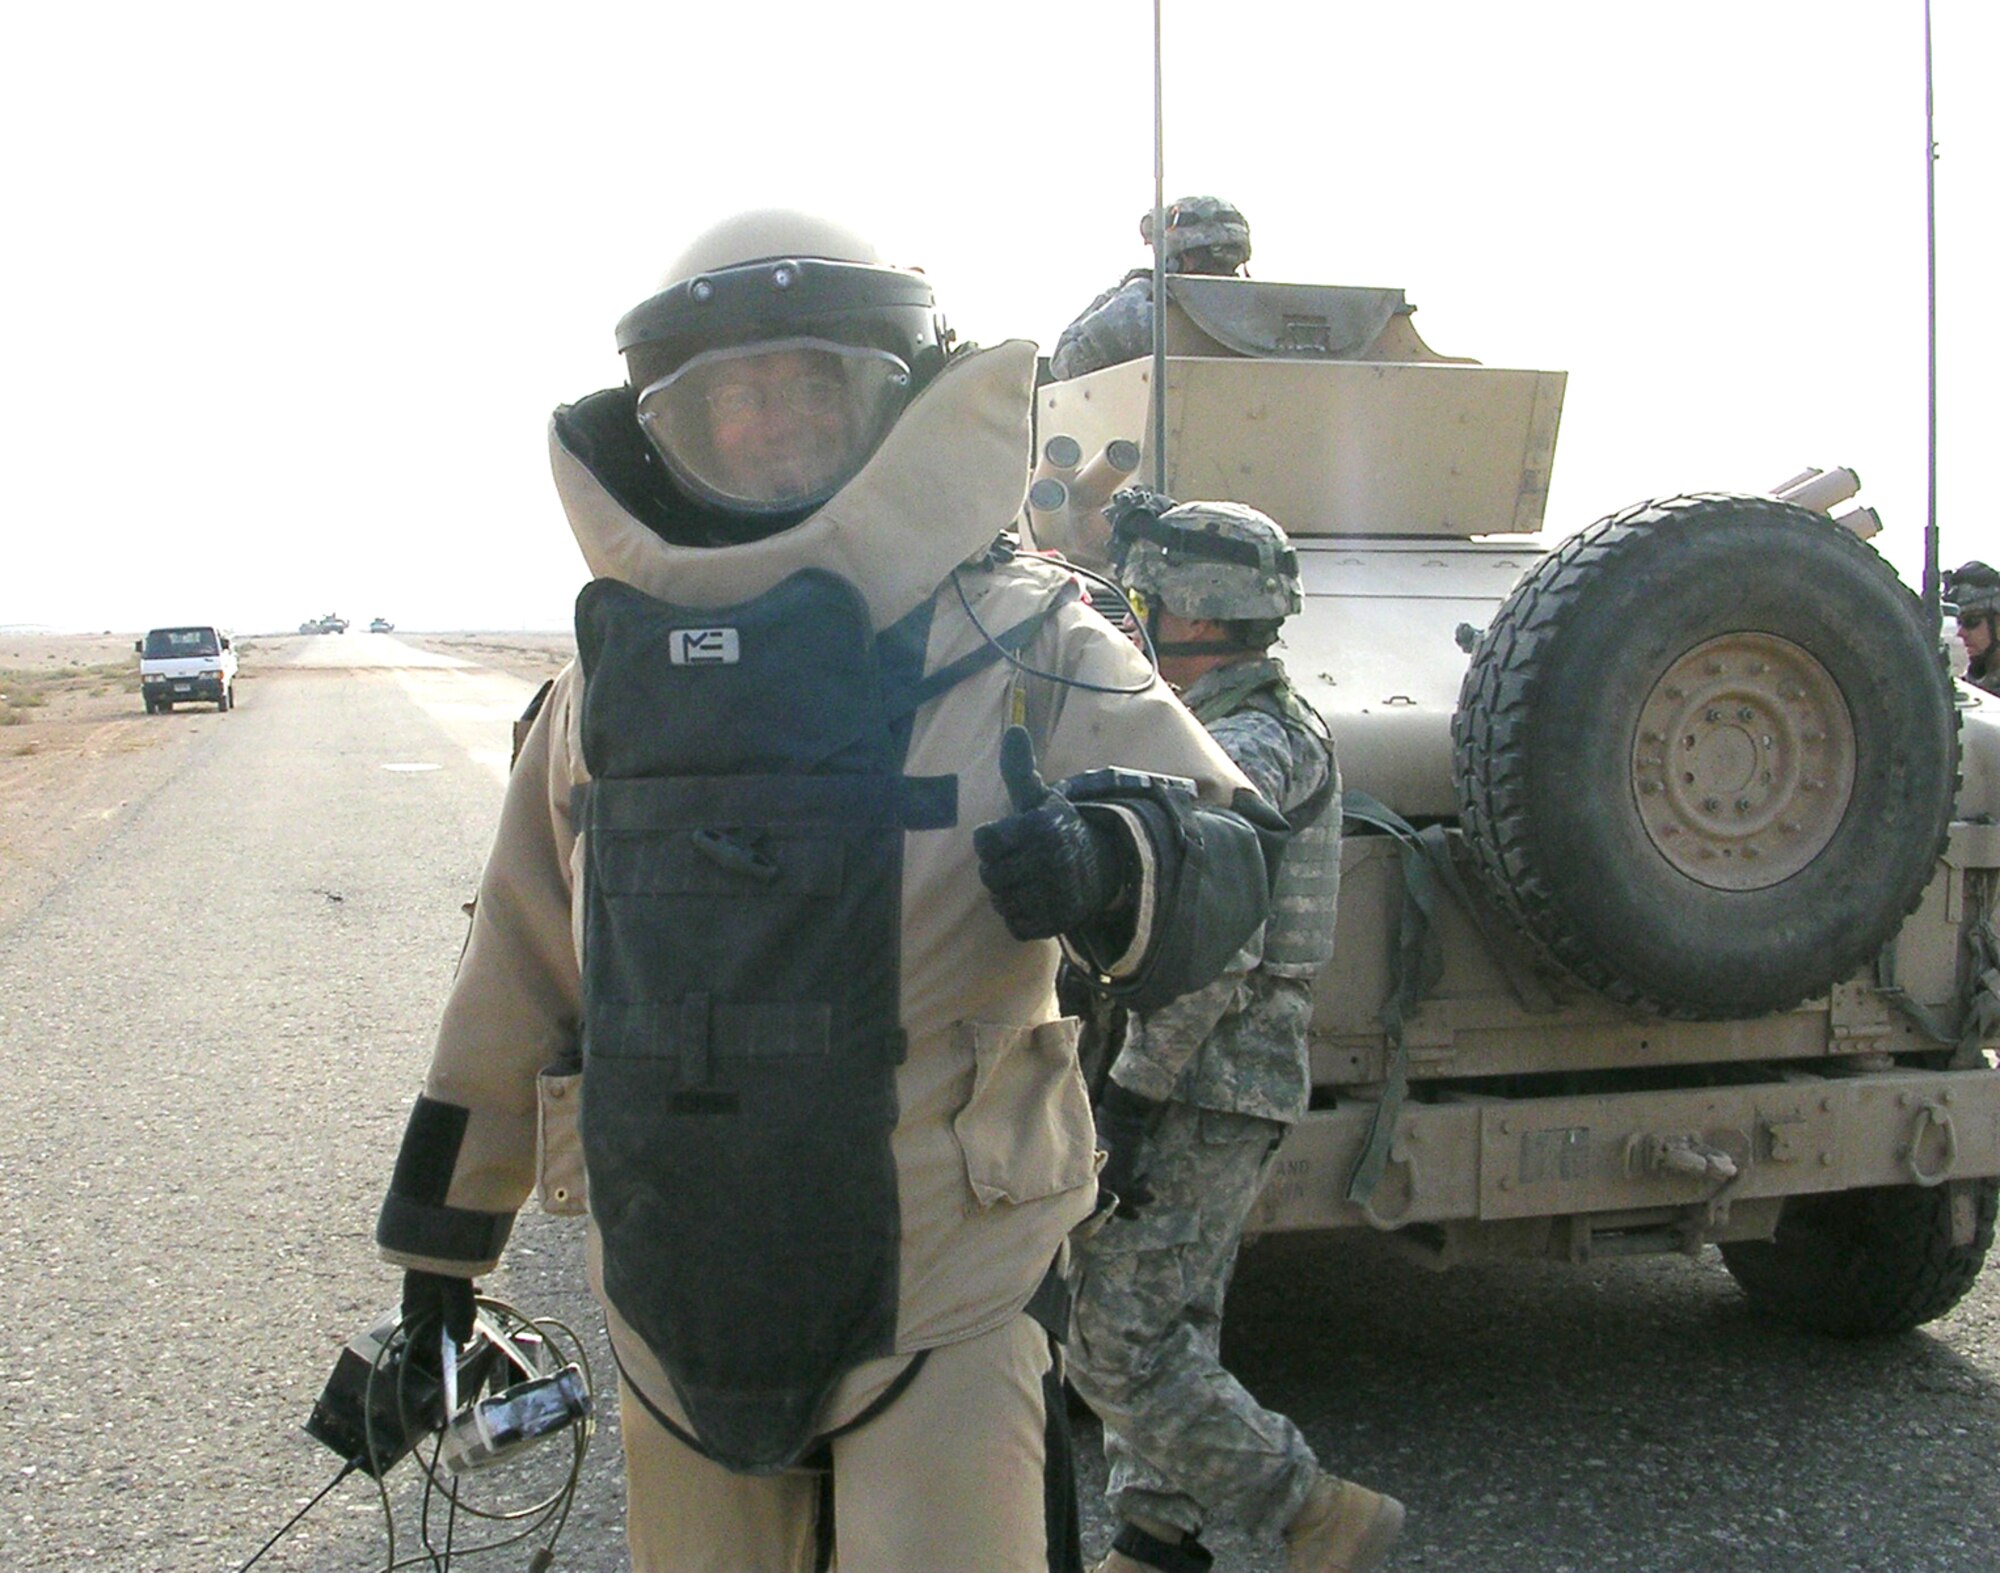 Tech. Sgt. Rik van de Pol, 347th Civil Engineer Squadron NCO in-charge of the Explosive Ordnance Disposal flight, gives a thumbs-up as he prepares to investigate a post-blast site north of Jisr Naft, Iraq, Dec. 6, 2005. Sergeant van de Pol was recently awarded the Bronze Star. (U.S. Army photo by Lt. Col. Arthur Kandarian)